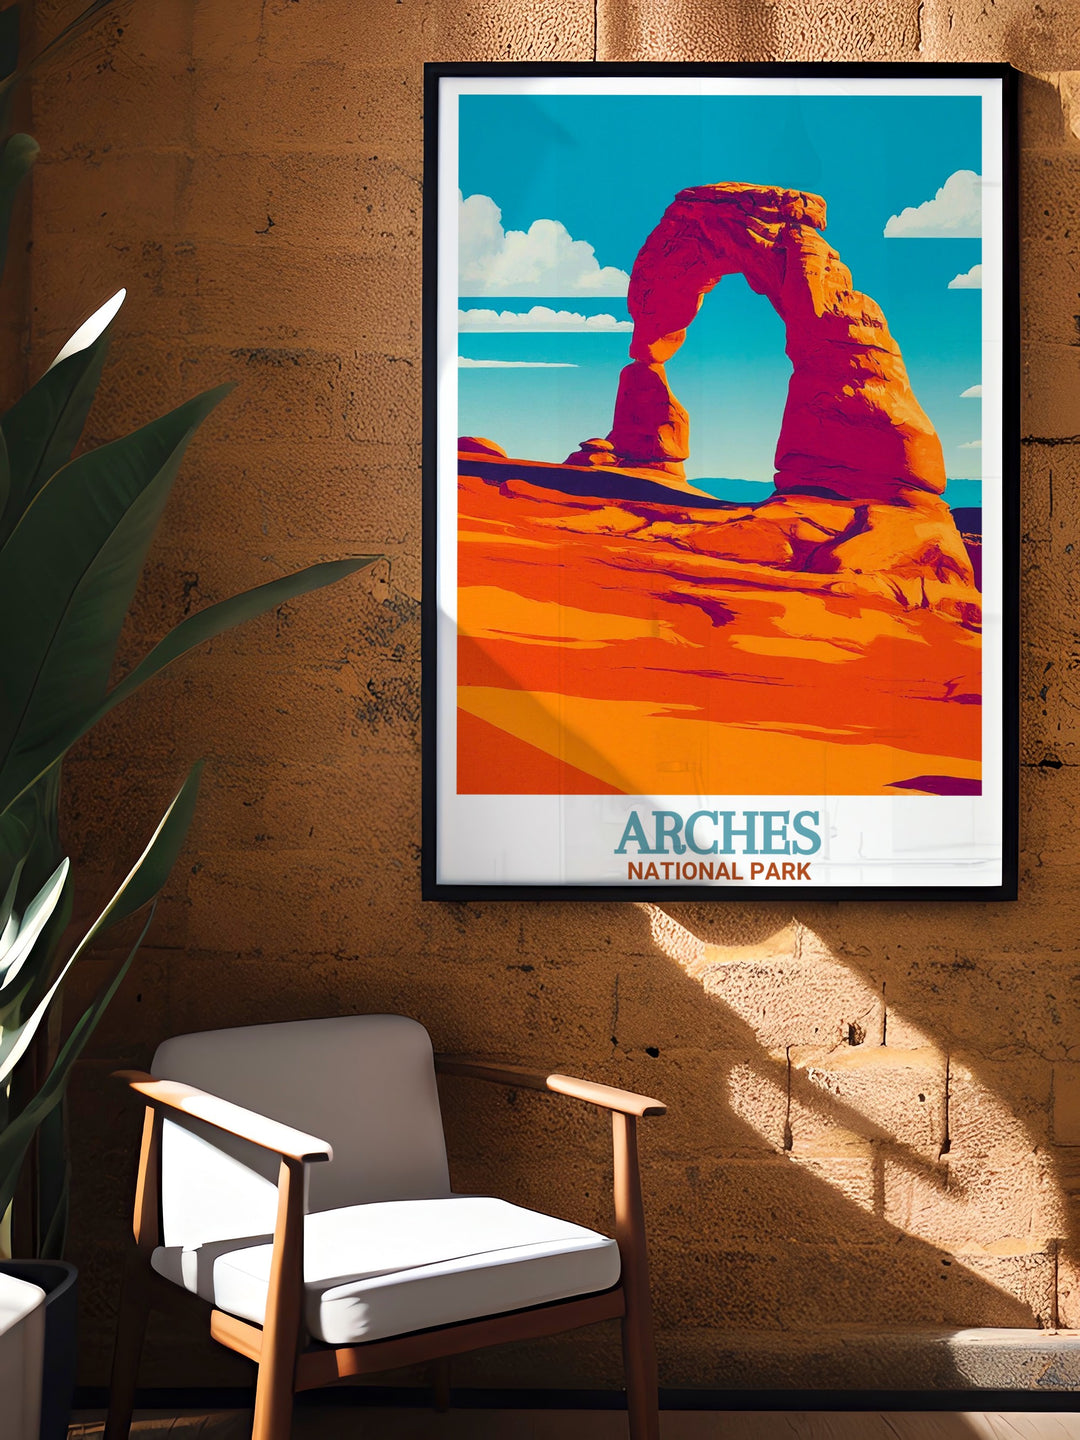 High quality Delicate Arch artwork from Arches National Park printed on premium paper using fade resistant inks ensuring longevity and vibrant colors making it a timeless addition to any art collection.